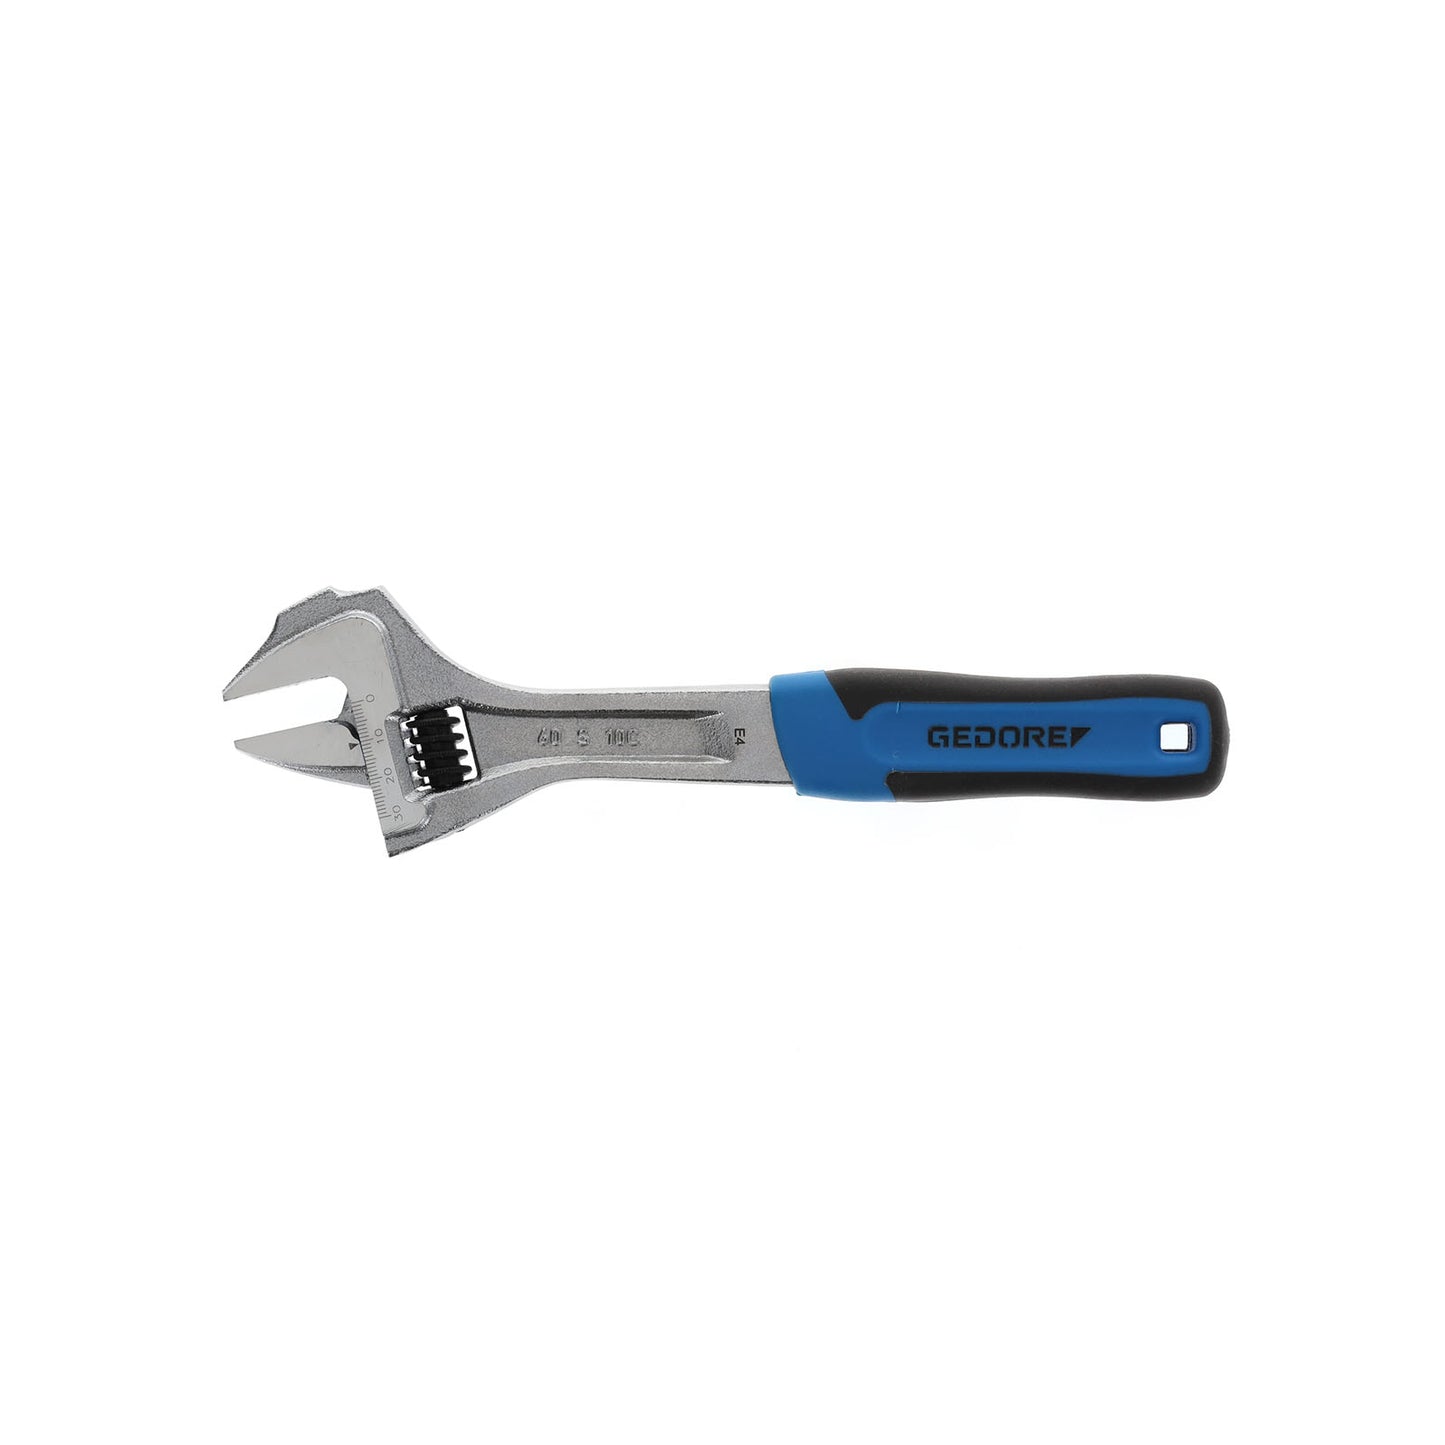 GEDORE 60 S 10 JC - Chrome Adjustable Wrench, 10" (2171007)